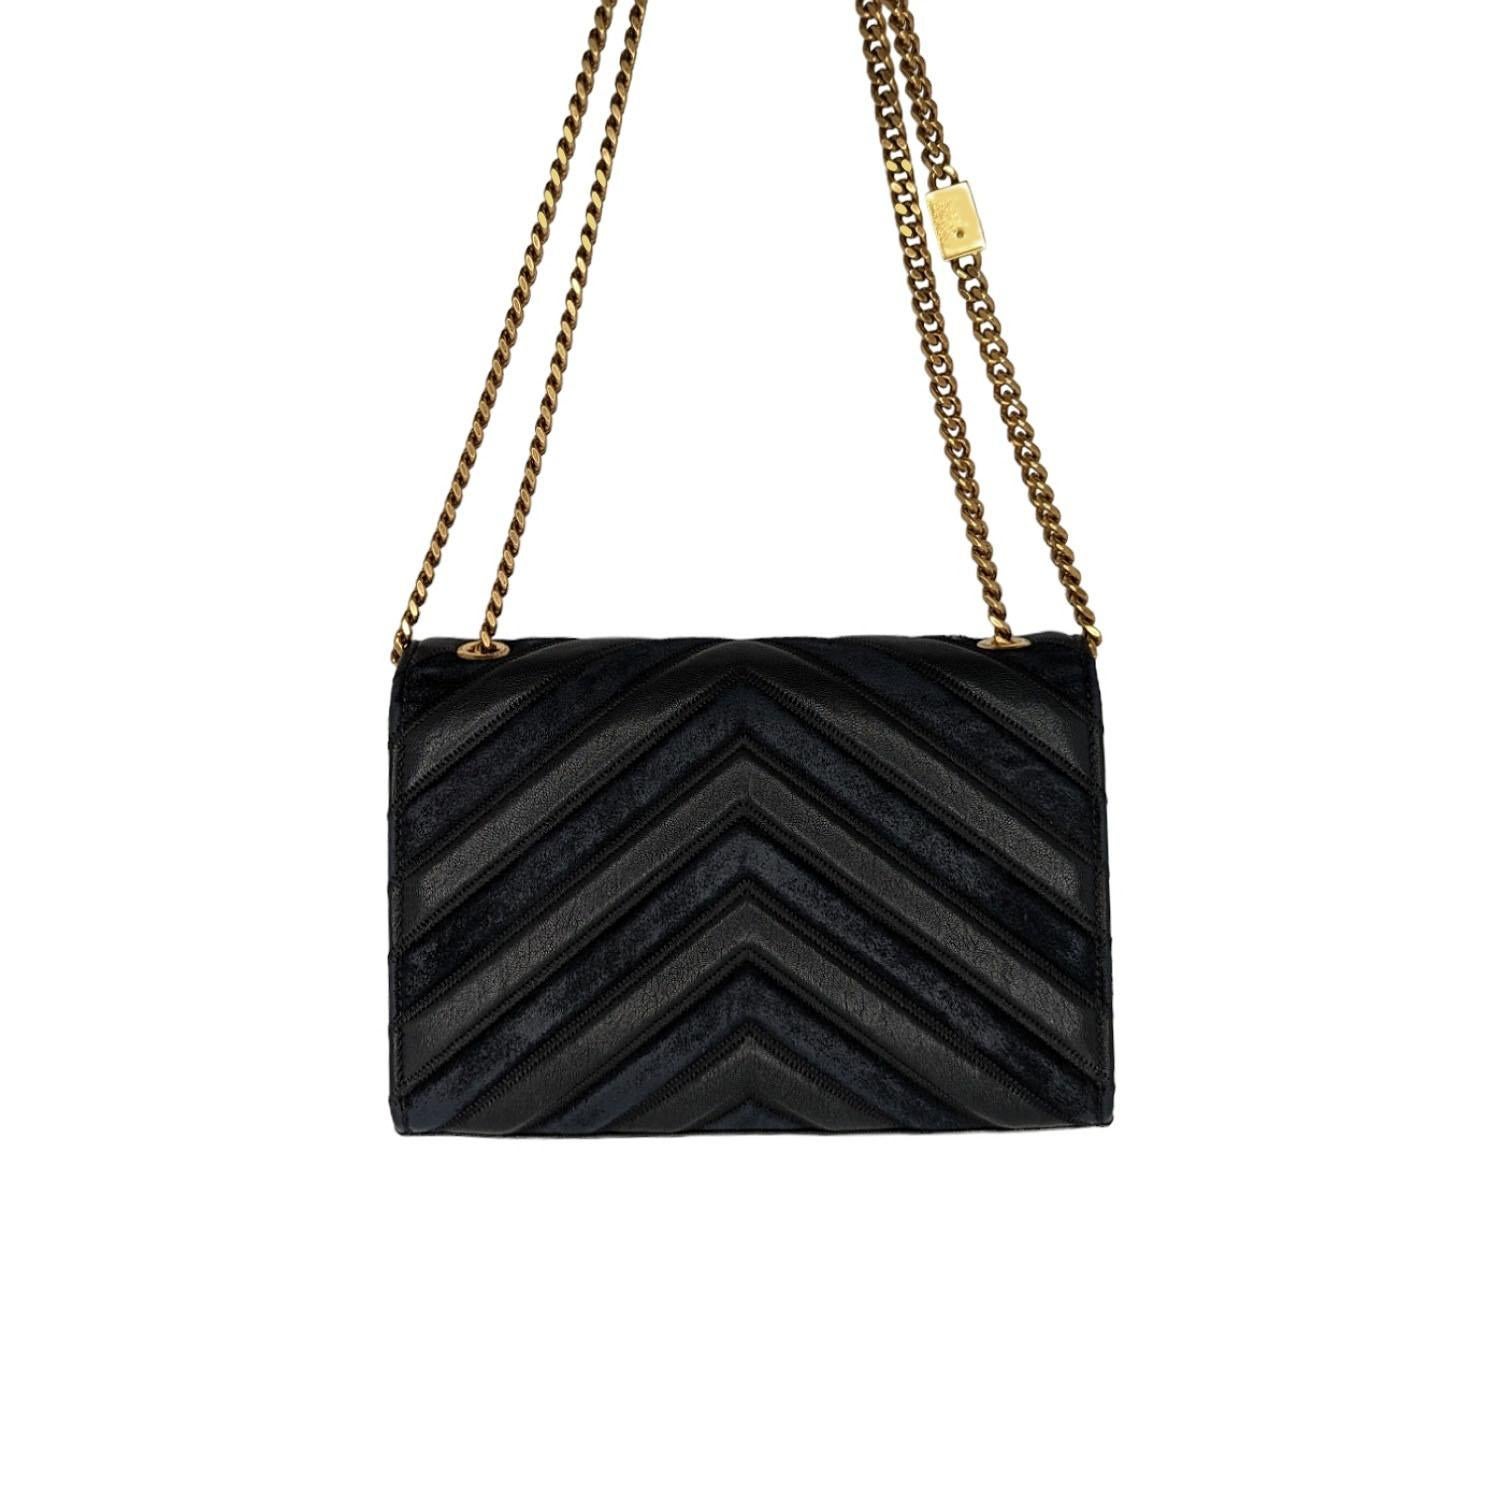 Leather and suede chevron patterning give this signature shoulder bag a luxe textural nuance. Iconic chain link shoulder strap Logo embellishment at front Magnetic snap flap closure One interior slip pocket Gold-tone hardware Leather/suede. Made in